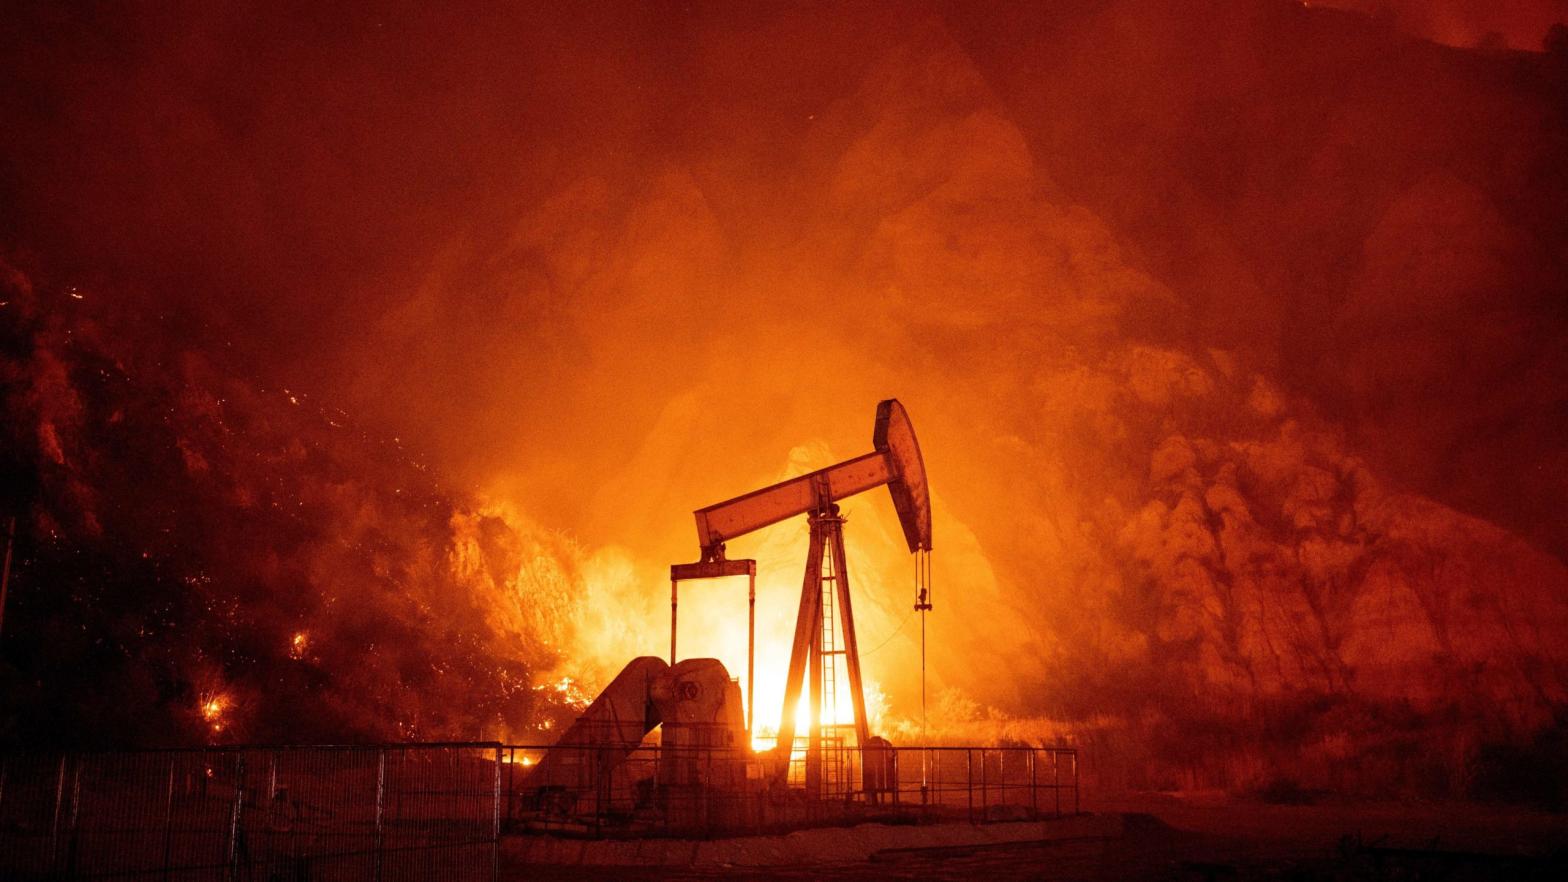 Flames from the Maria fire burn through an oil field in Santa Paula, California late on October 31, 2019. (Photo: Josh Edelson/AFP, Getty Images)